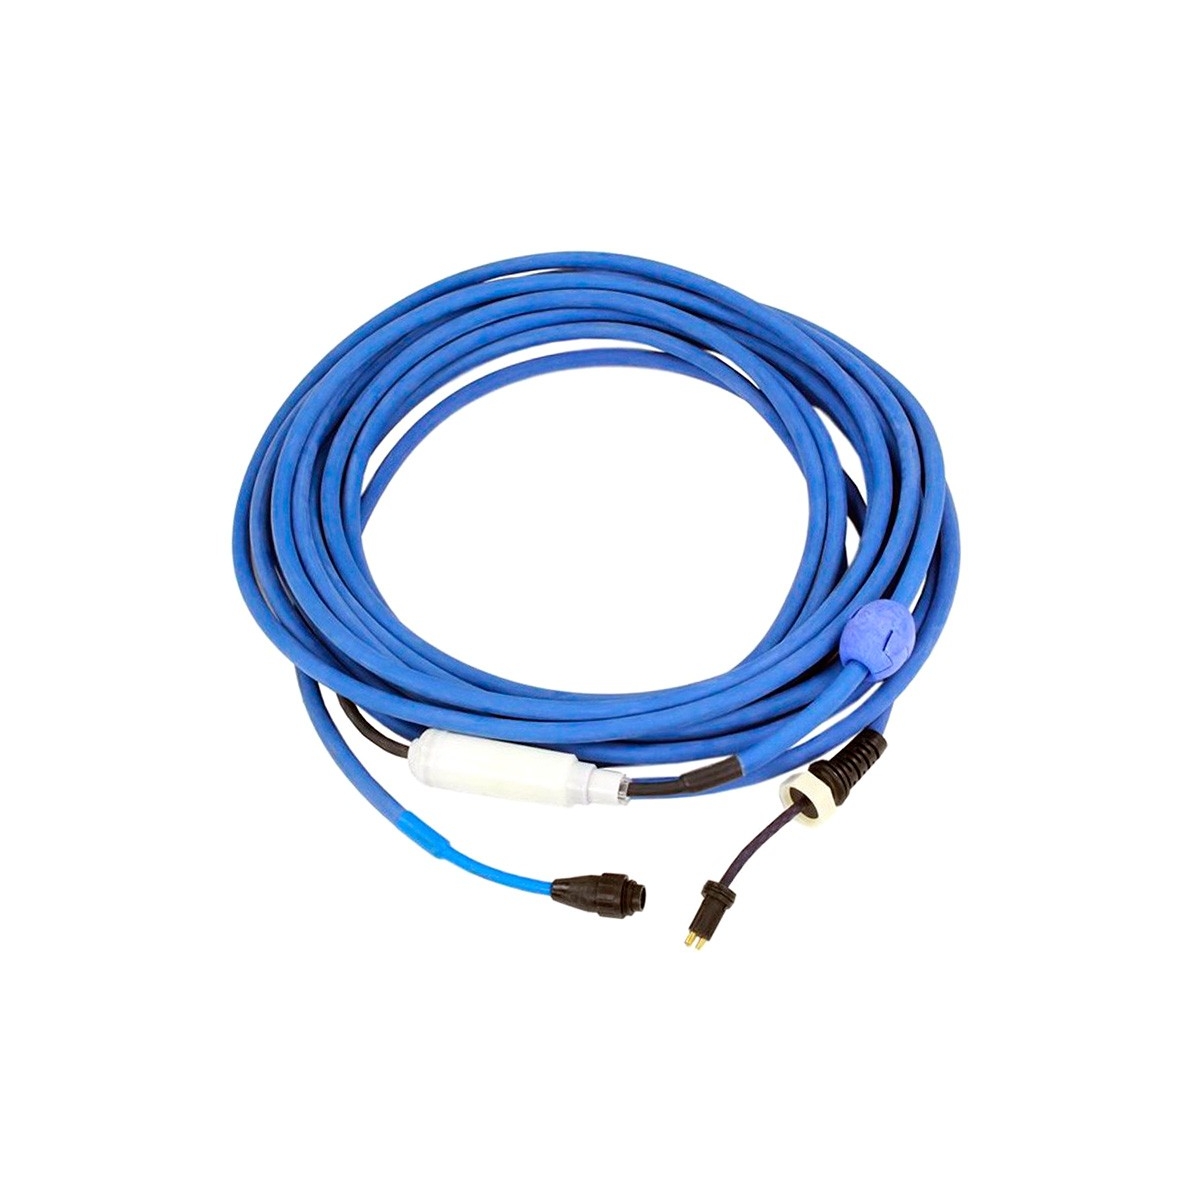 18m floating cable with swivel Dolphin 9995873-DIY